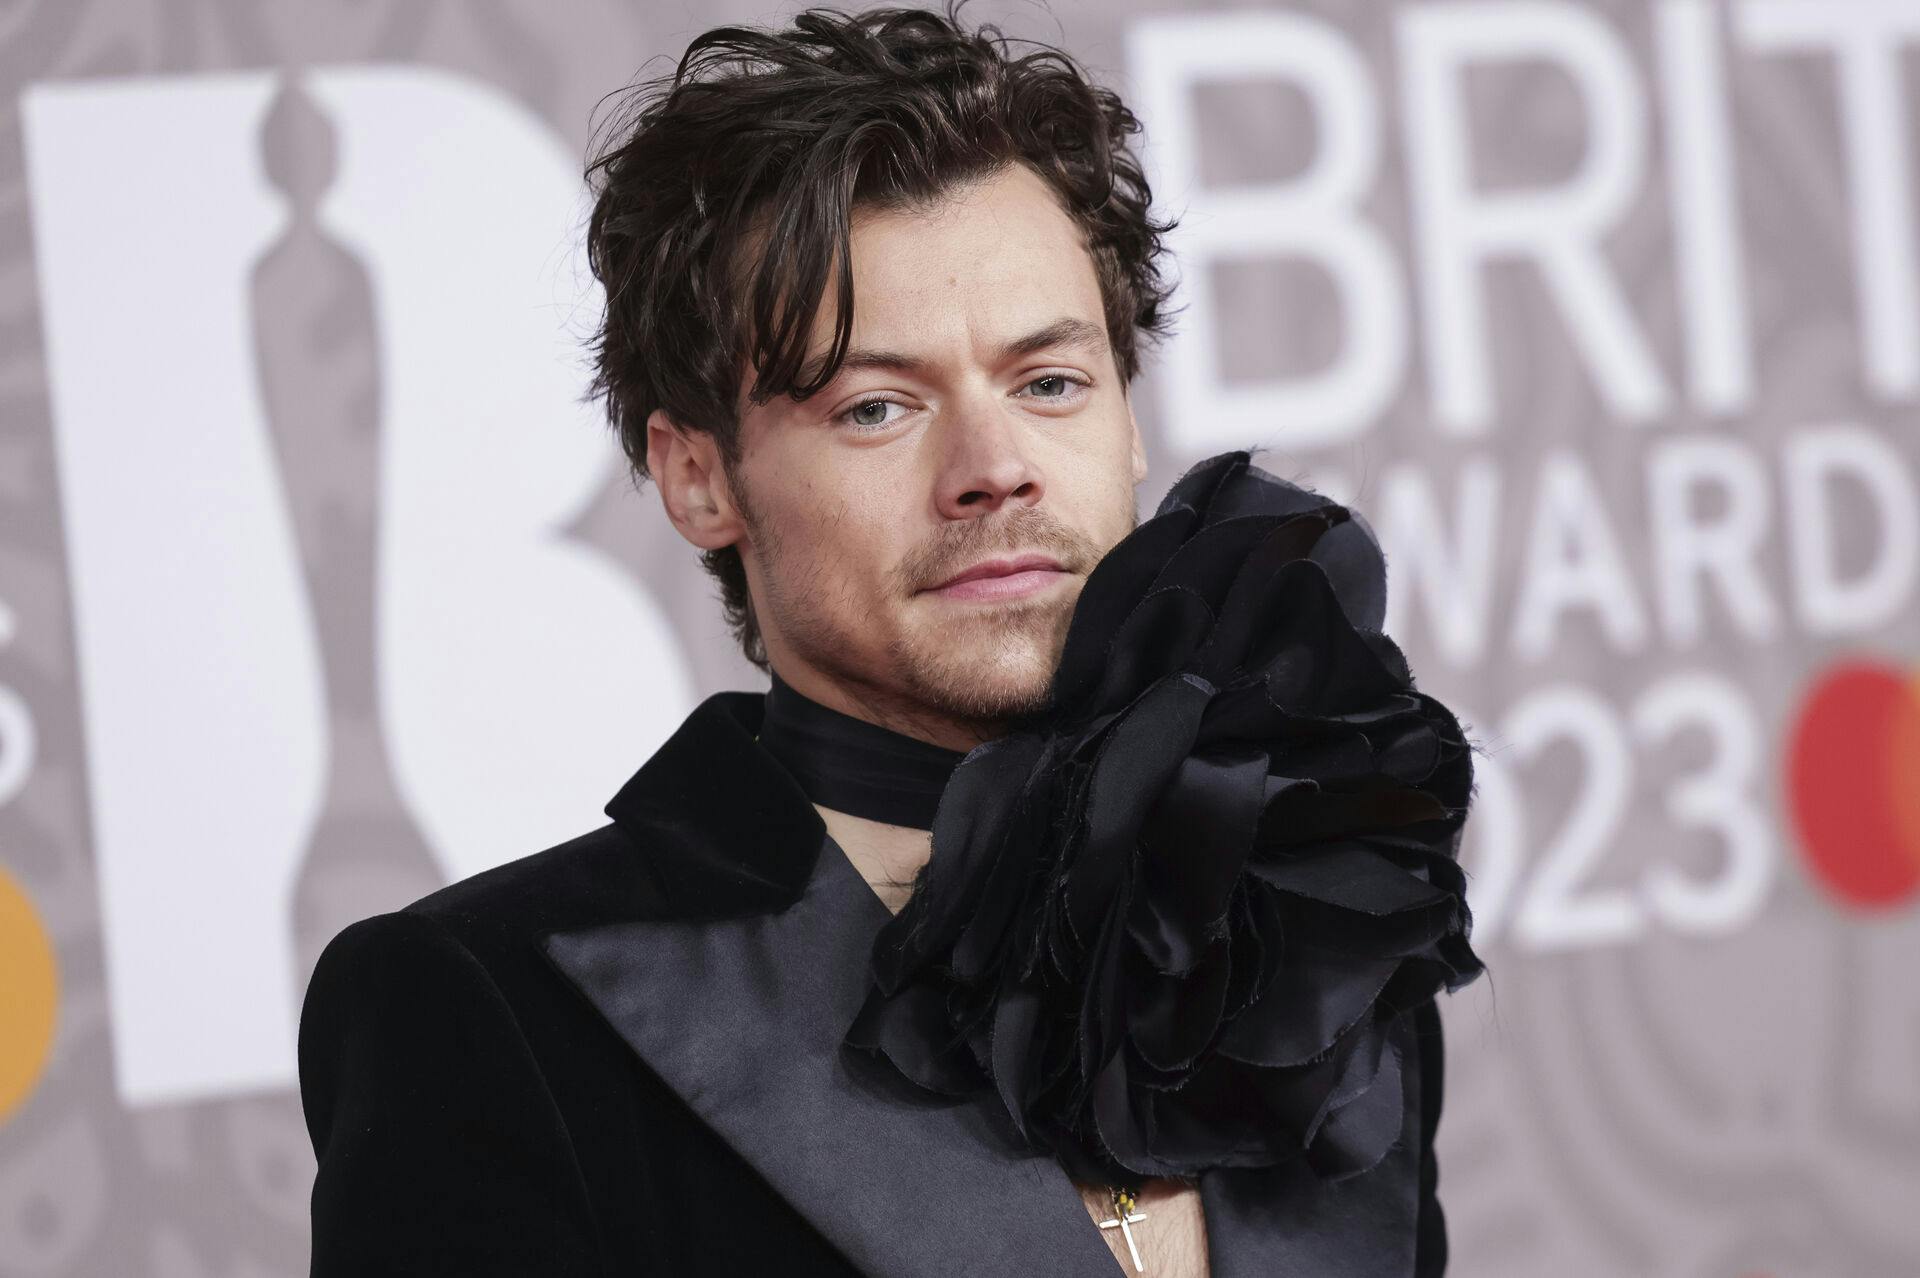 Harry Styles poses for photographers upon arrival at the Brit Awards 2023 in London, Saturday, Feb. 11, 2023. (Photo by Vianney Le Caer/Invision/AP)